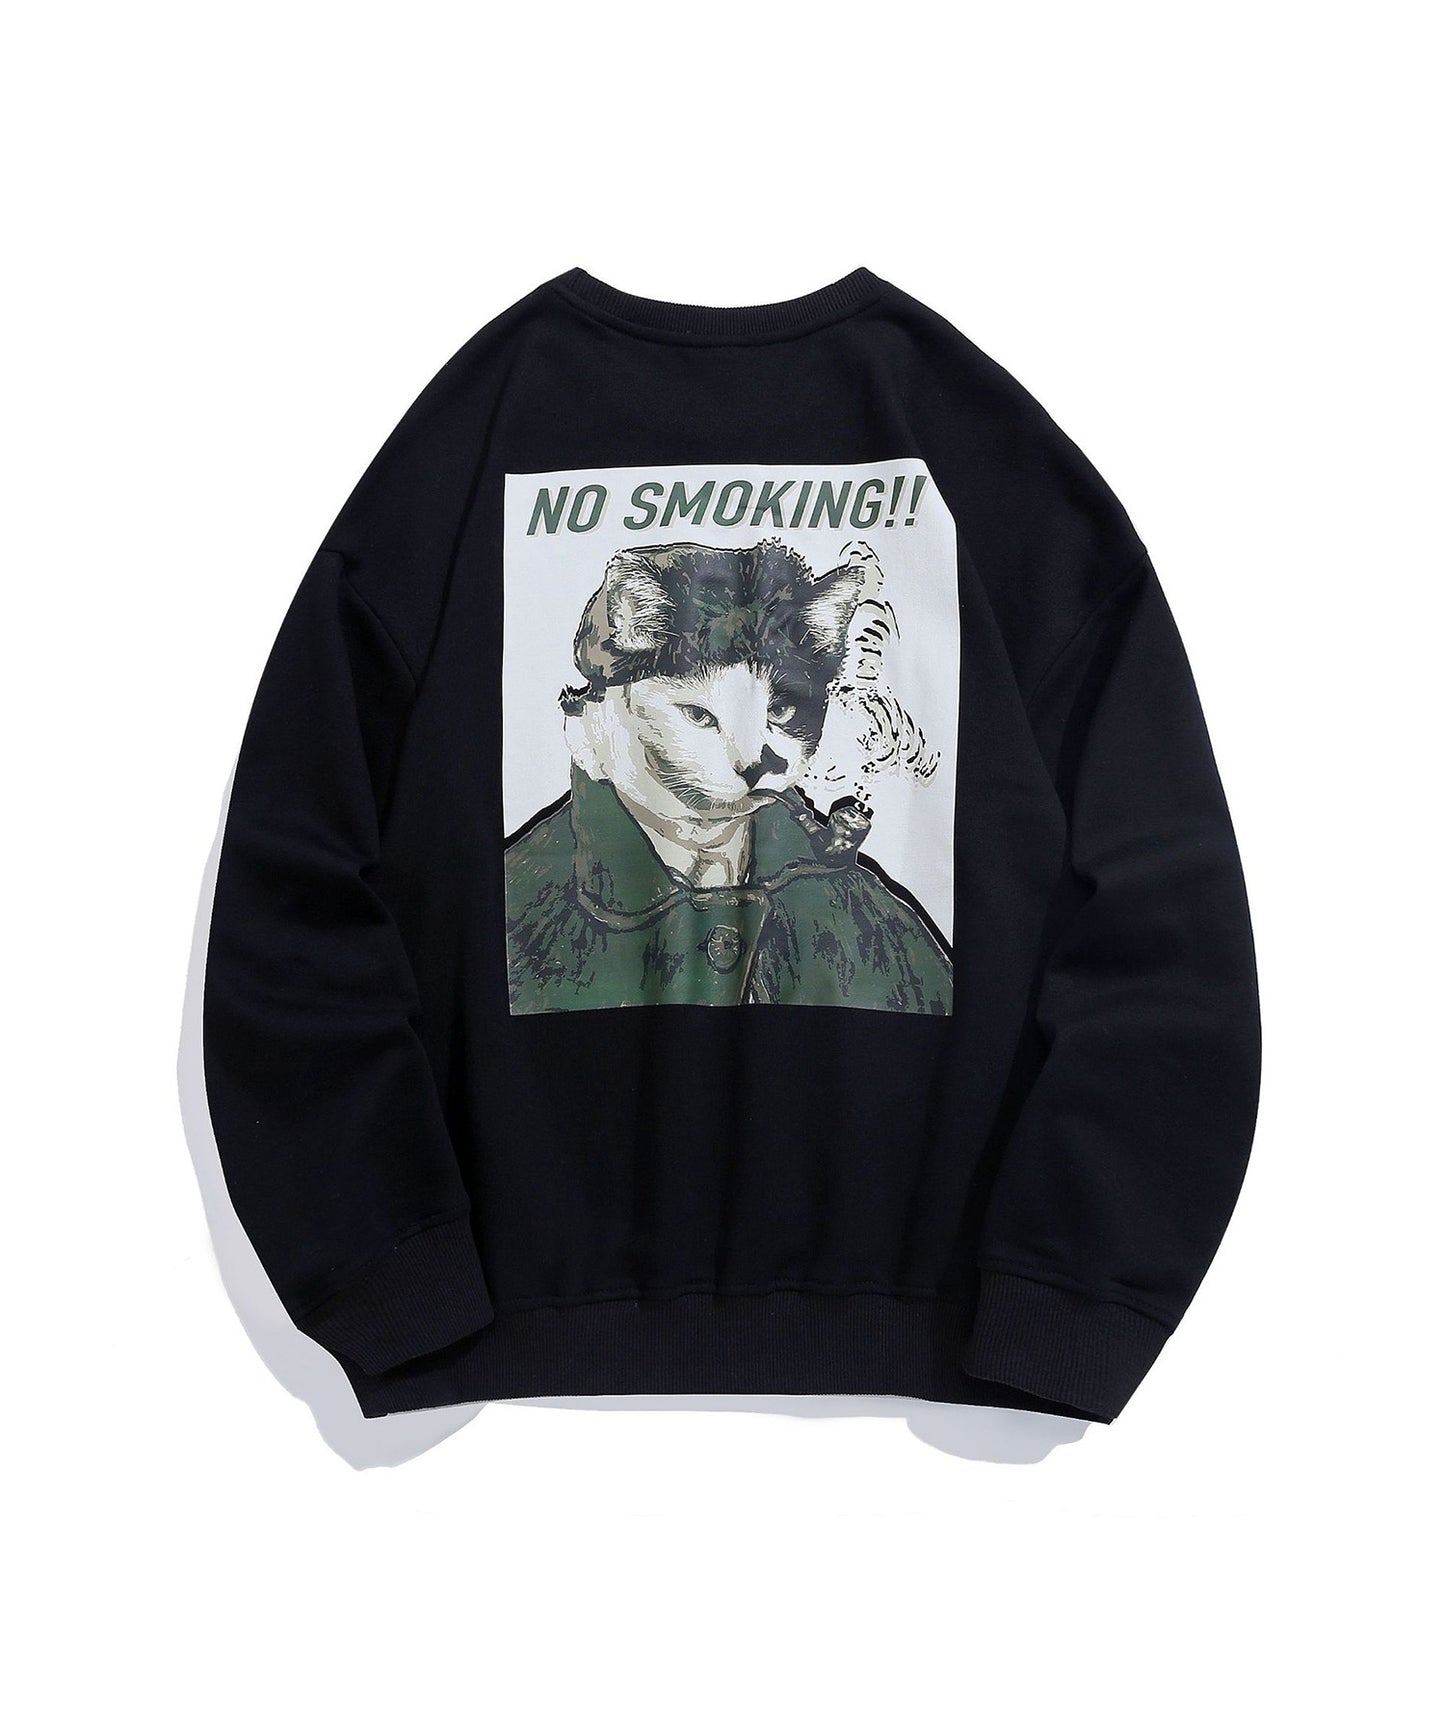 [HOOK -original-] Print sweatshirt featuring famous paintings from around the world on cats